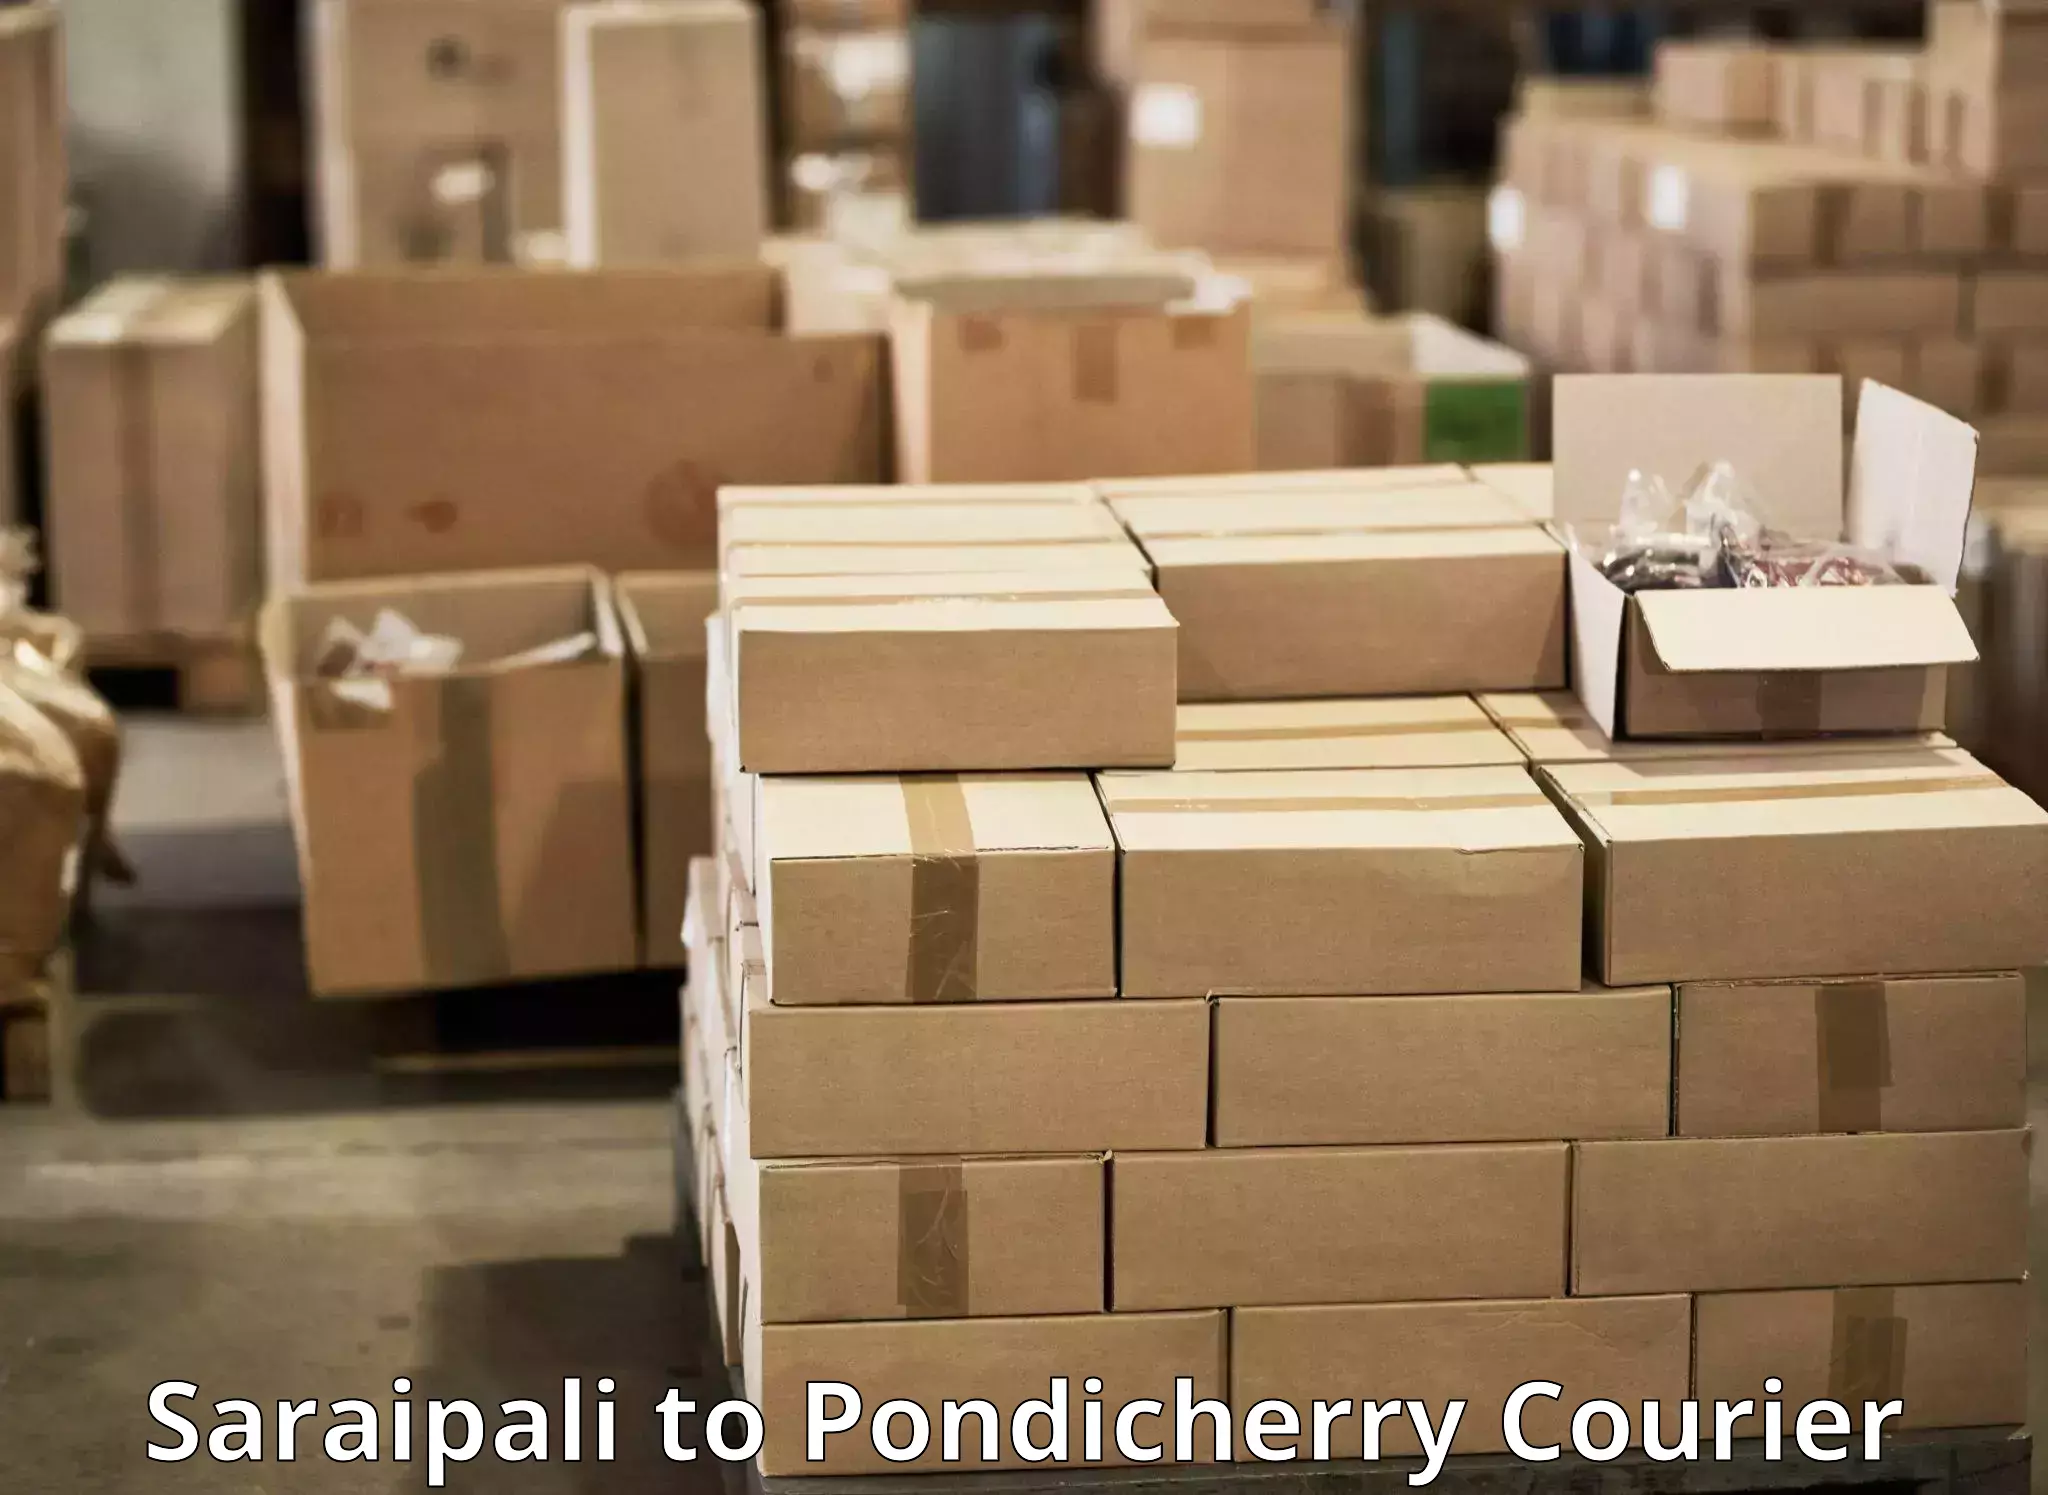 State-of-the-art courier technology Saraipali to Pondicherry